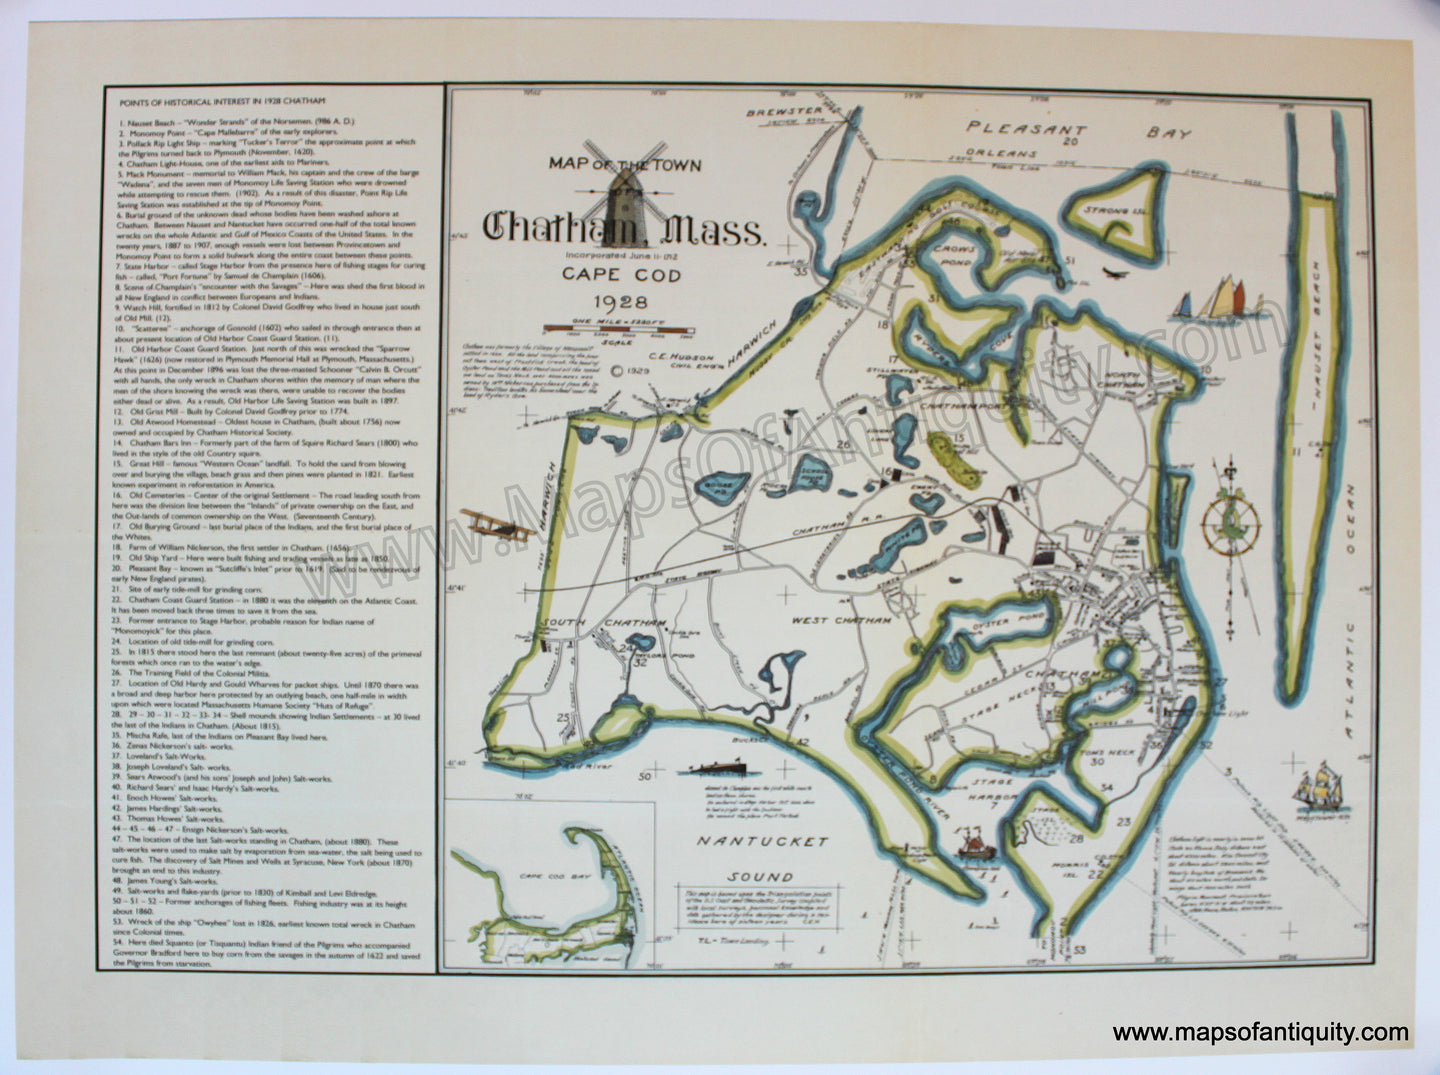 Reproduction-Map-of-the-Town-Chatham-Mass.